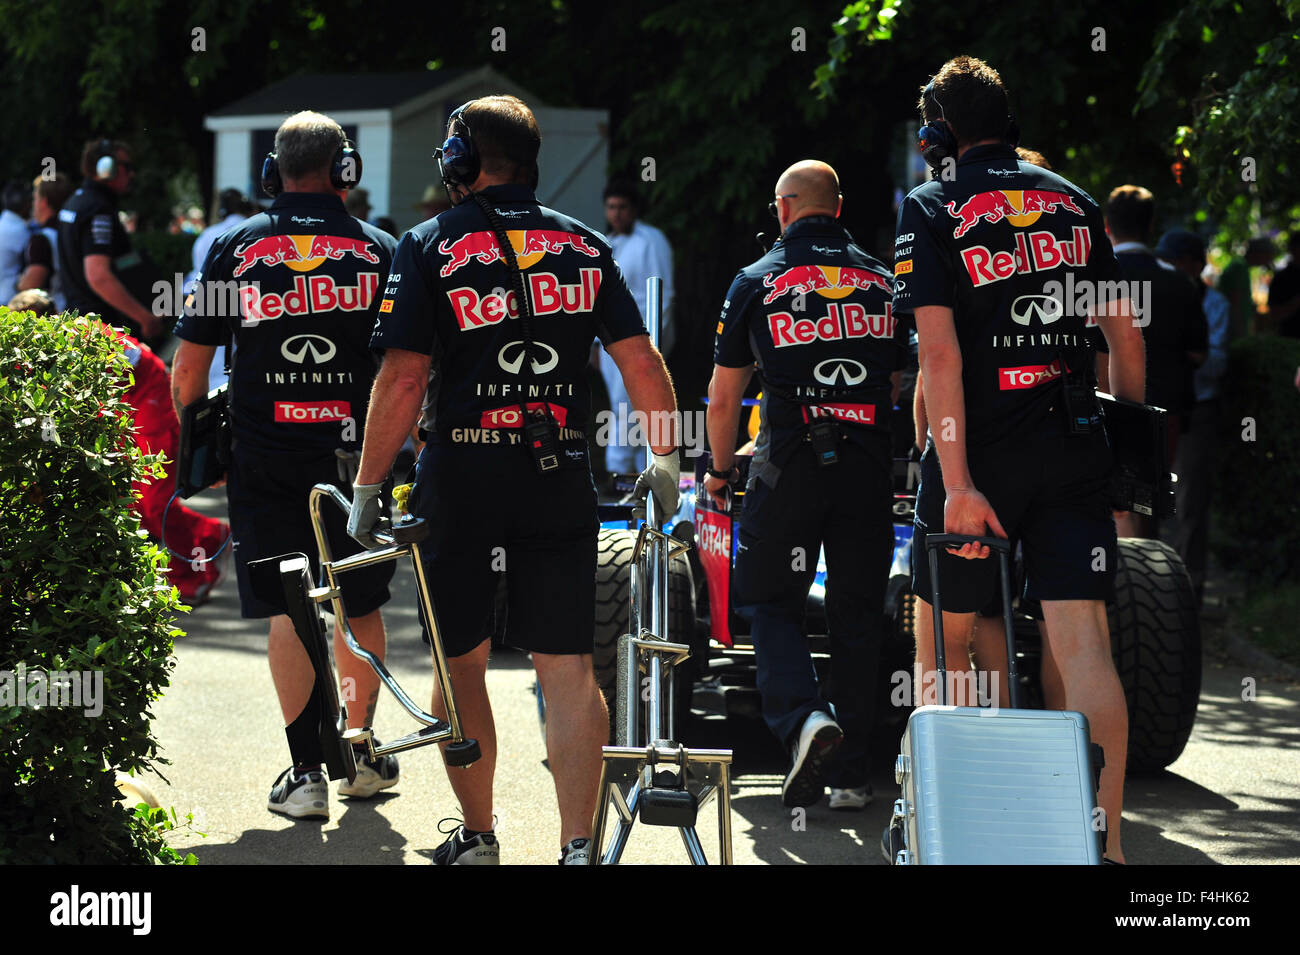 Red Bull F1 Team mechanics pull equipment into the paddock at the Goodwood Festival of Speed in the UK. Stock Photo